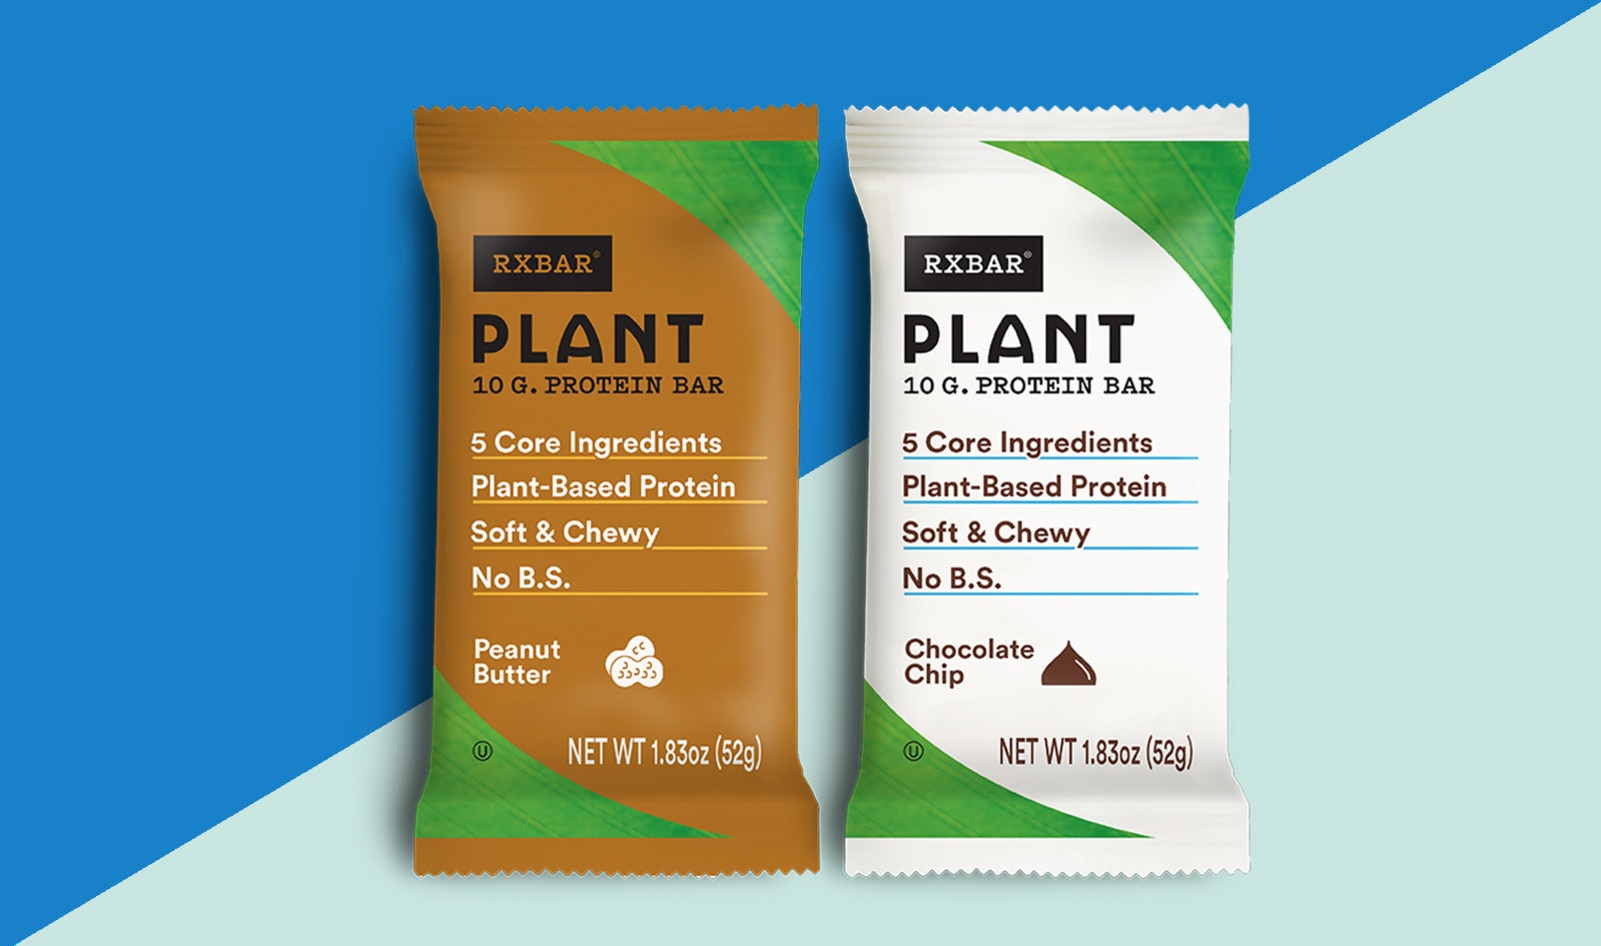 RXBAR Is Launching Its First Egg-Free Vegan Protein Bar